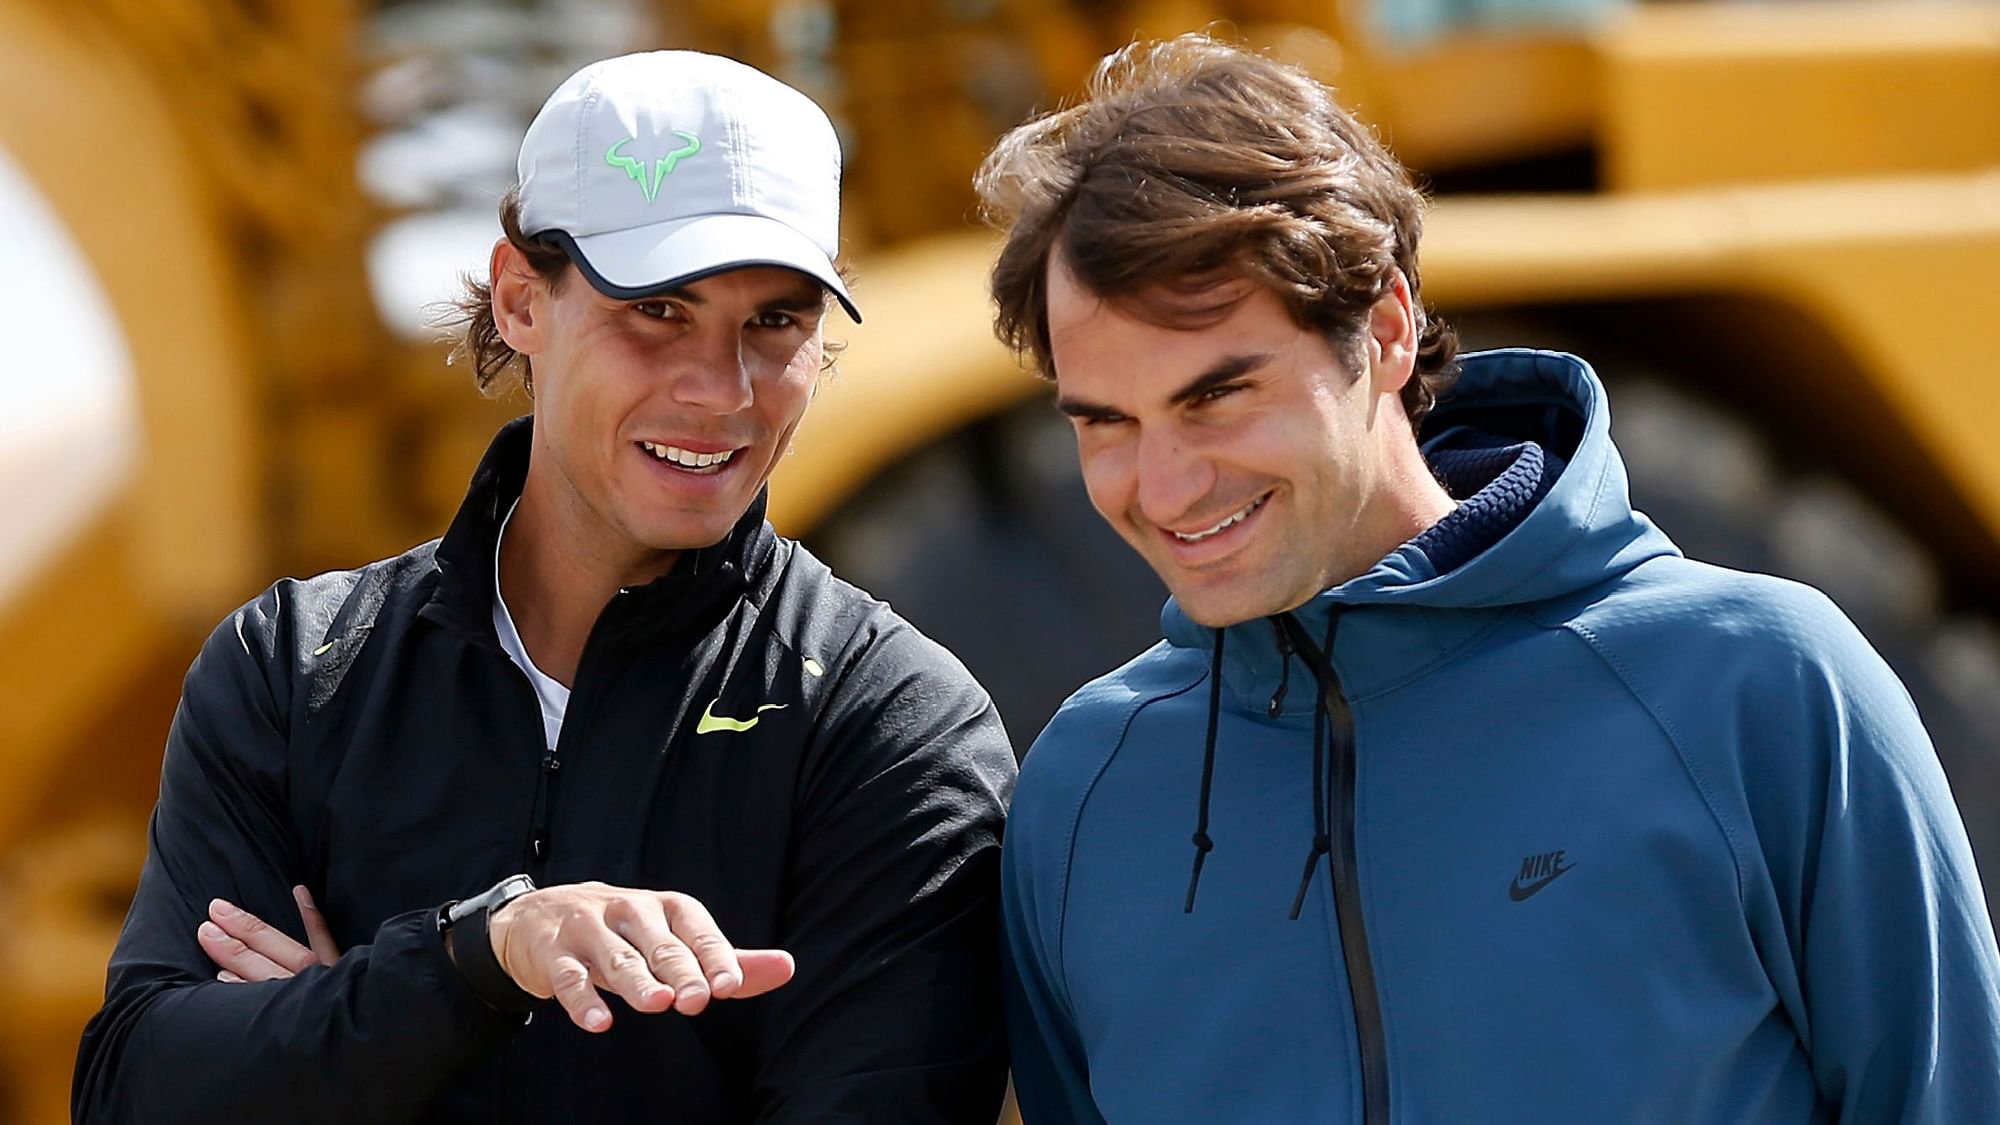 Rafael Nadal hosted an Instagram live with Roger Federer and Andy Murray.